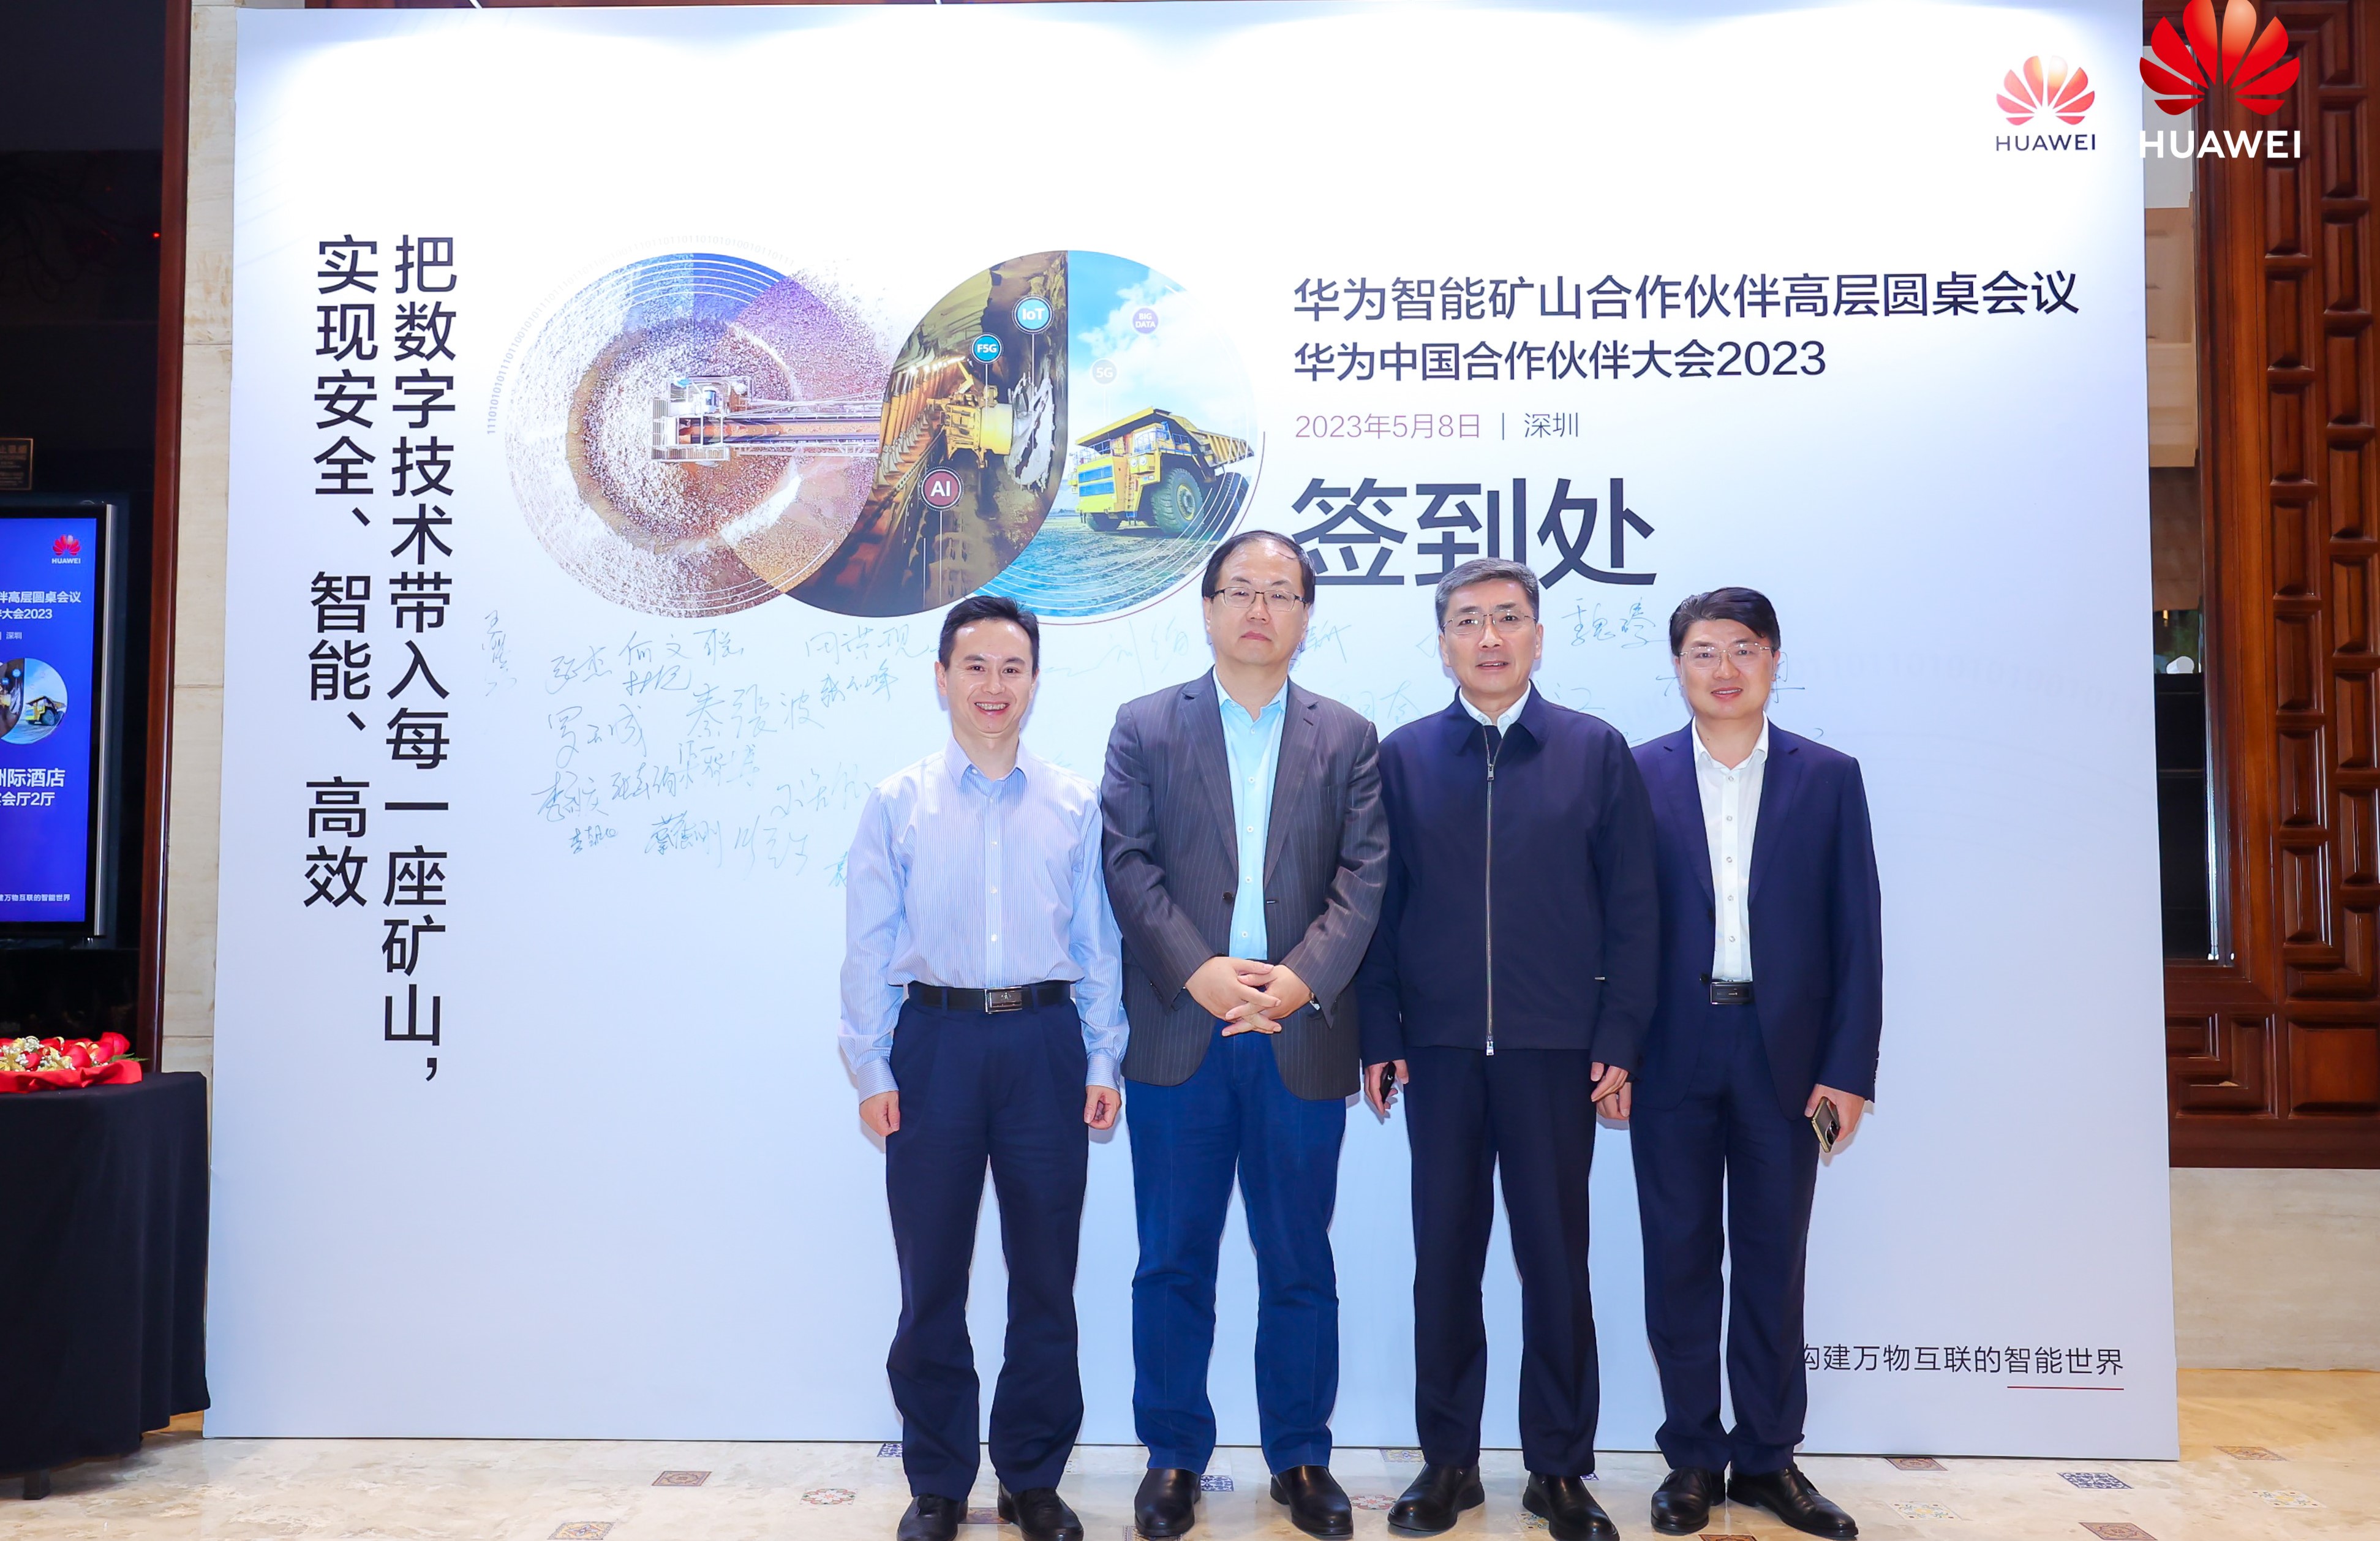 Cooperation and Exchange | Invited to attend Huawei China Partner Conference 2023